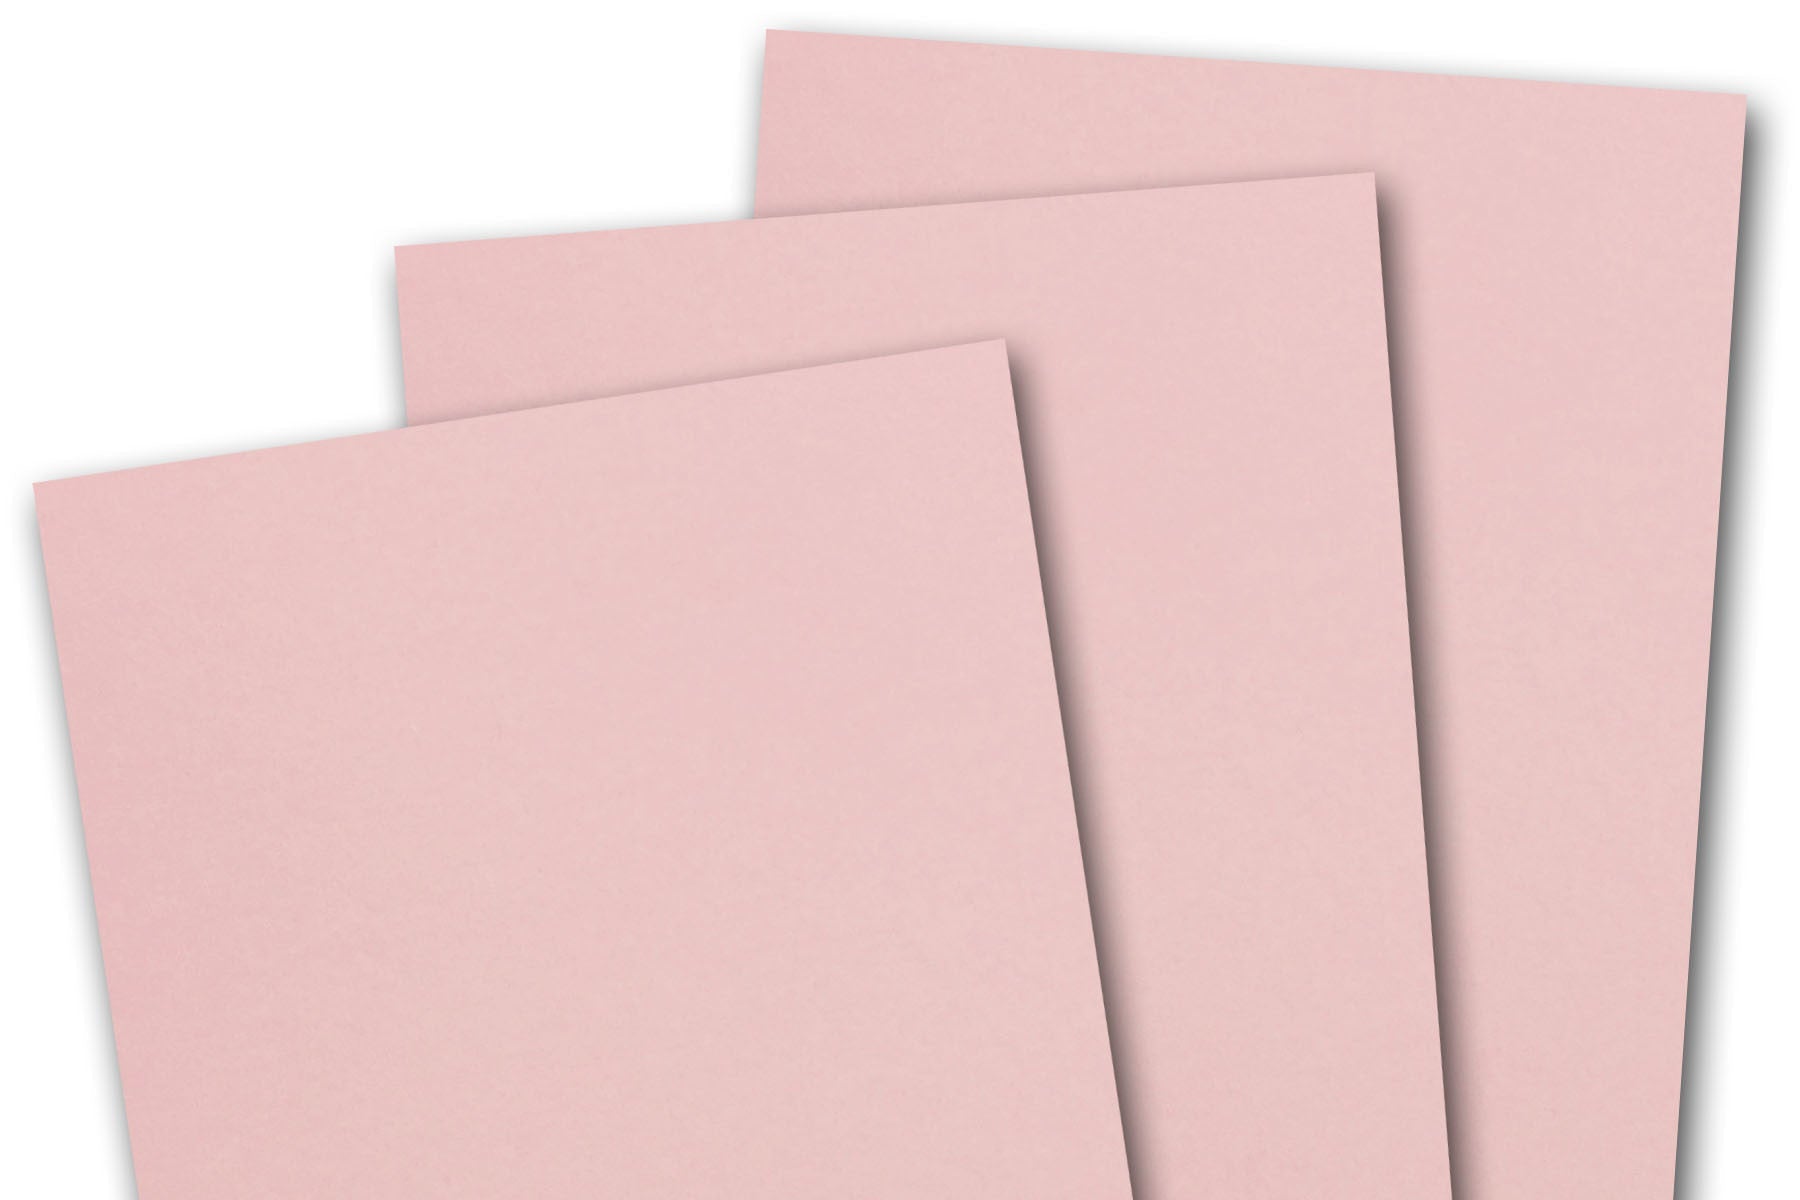 Soft Pink 8-1/2-x-11 BASIS Paper, 50 per package, 104 GSM (28/70lb Text)